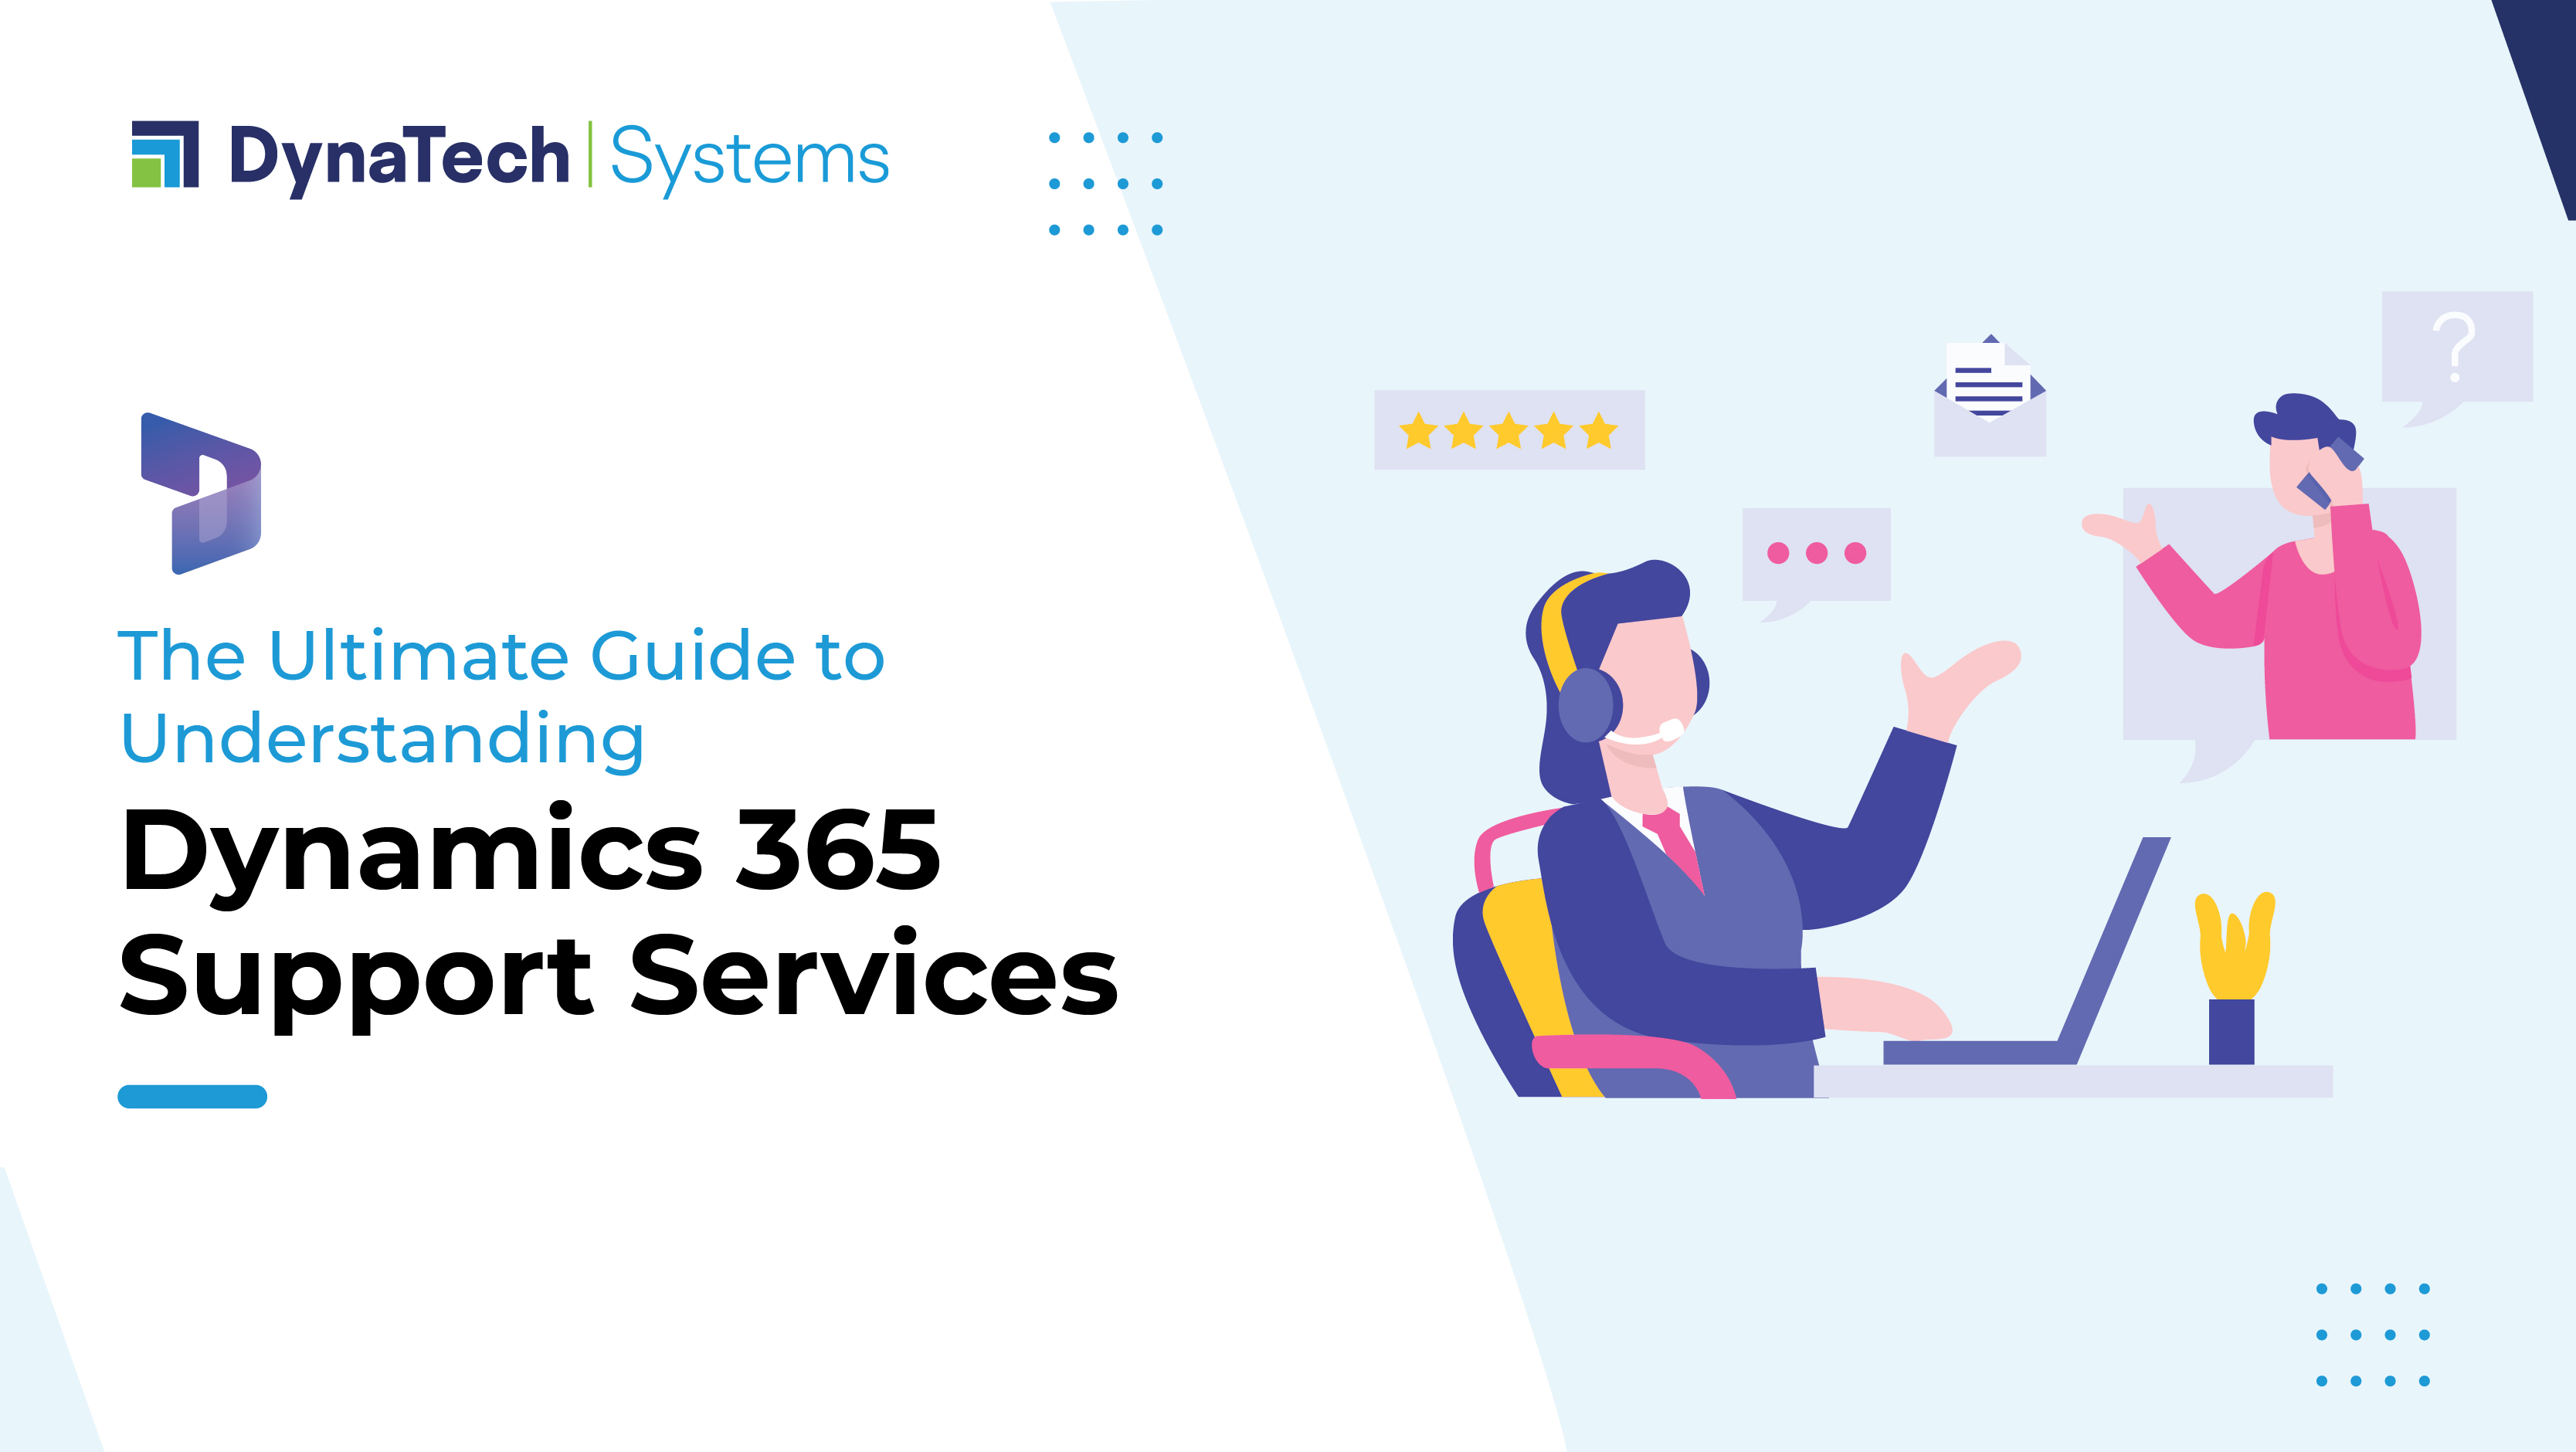 The Ultimate Guide to Understanding Dynamics 365 Support Services